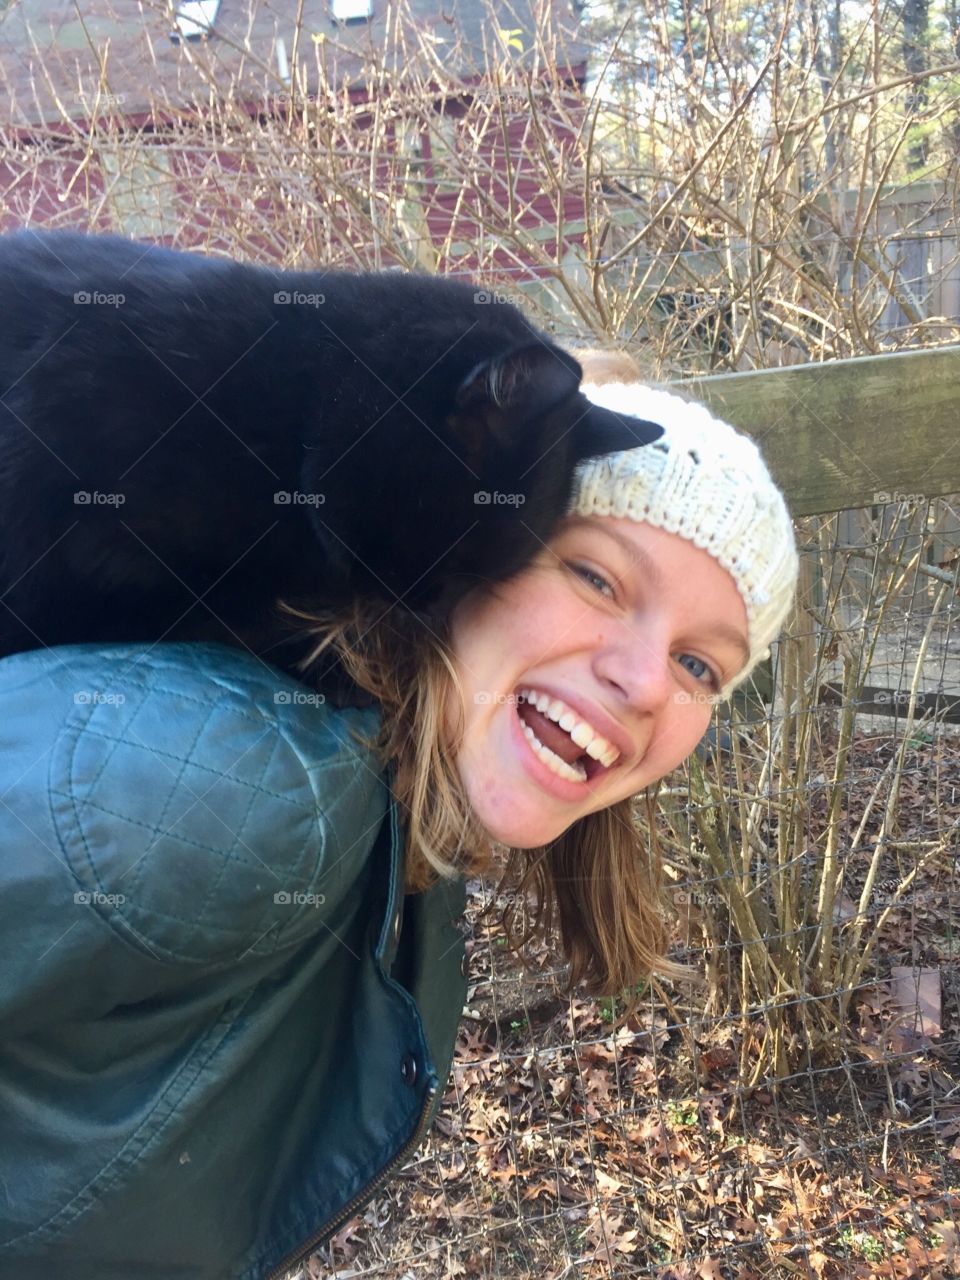 A young woman in a white headband smiles while holding a black cat